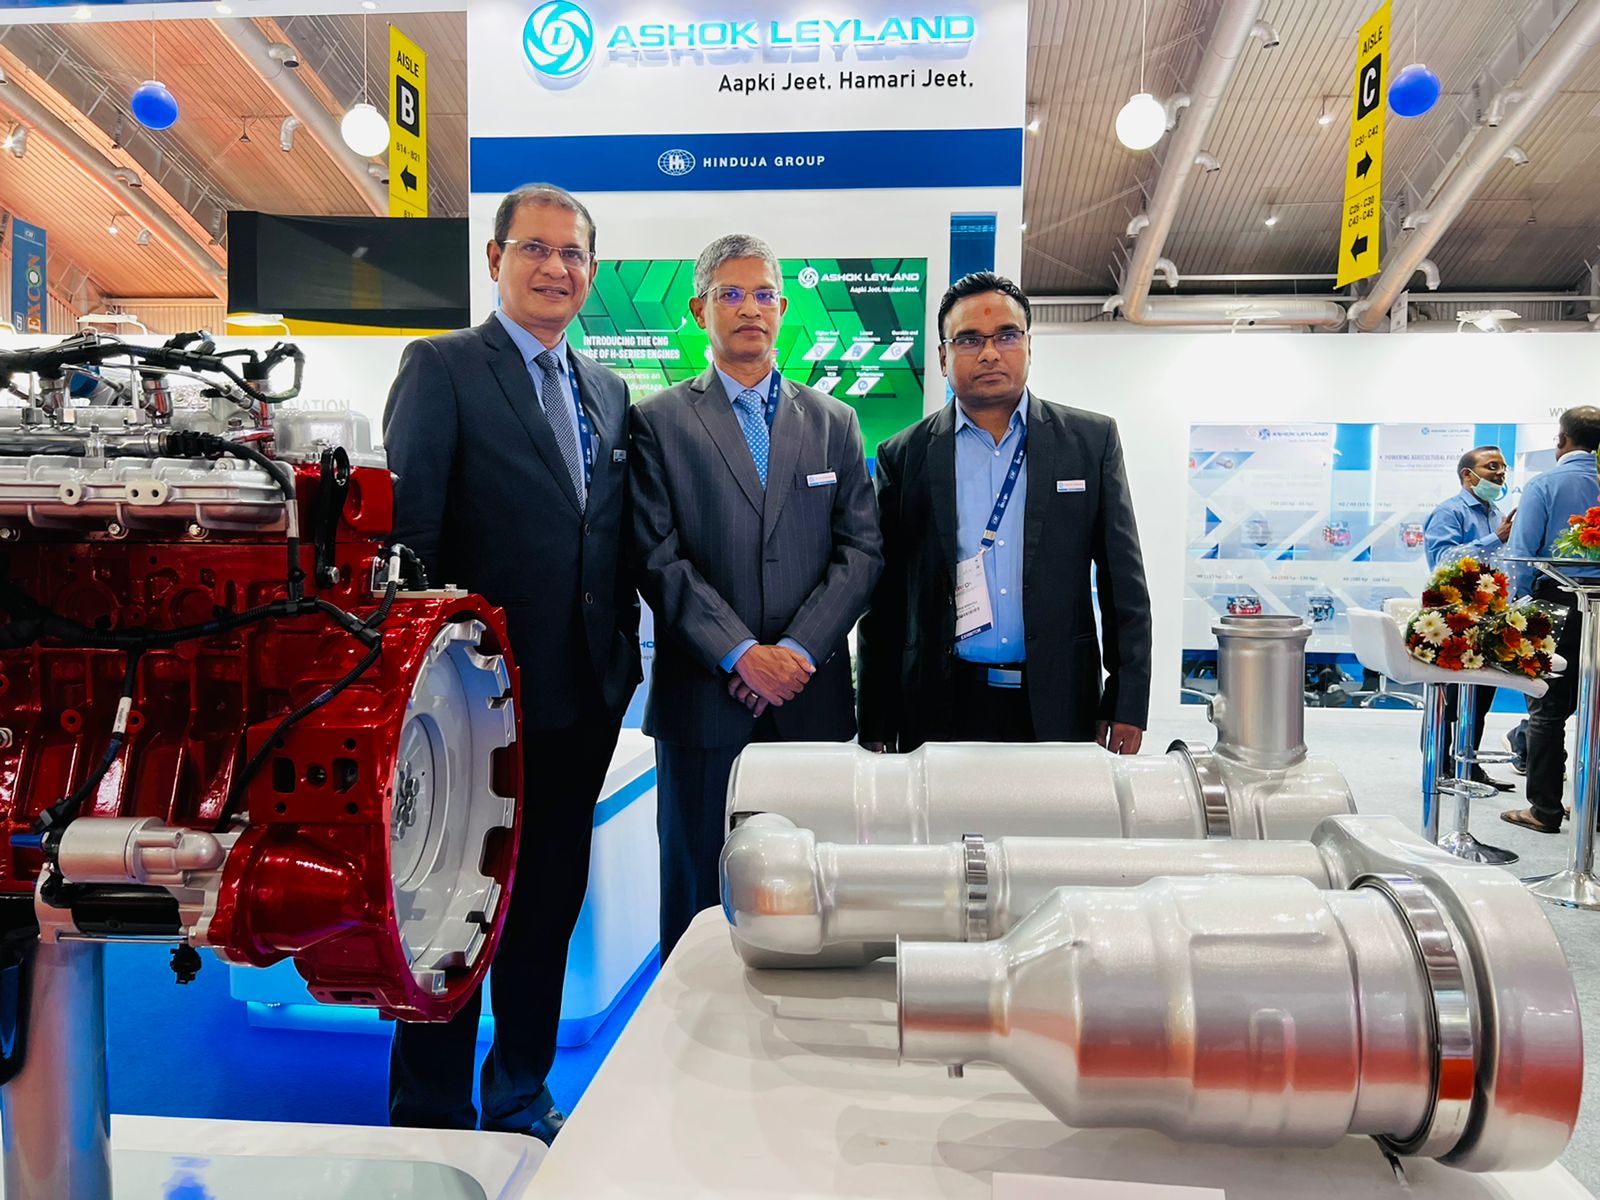 ashok-leyland-reaches-yet-another-milestone-showcases-cng-engine-h-series-at-excon-2022